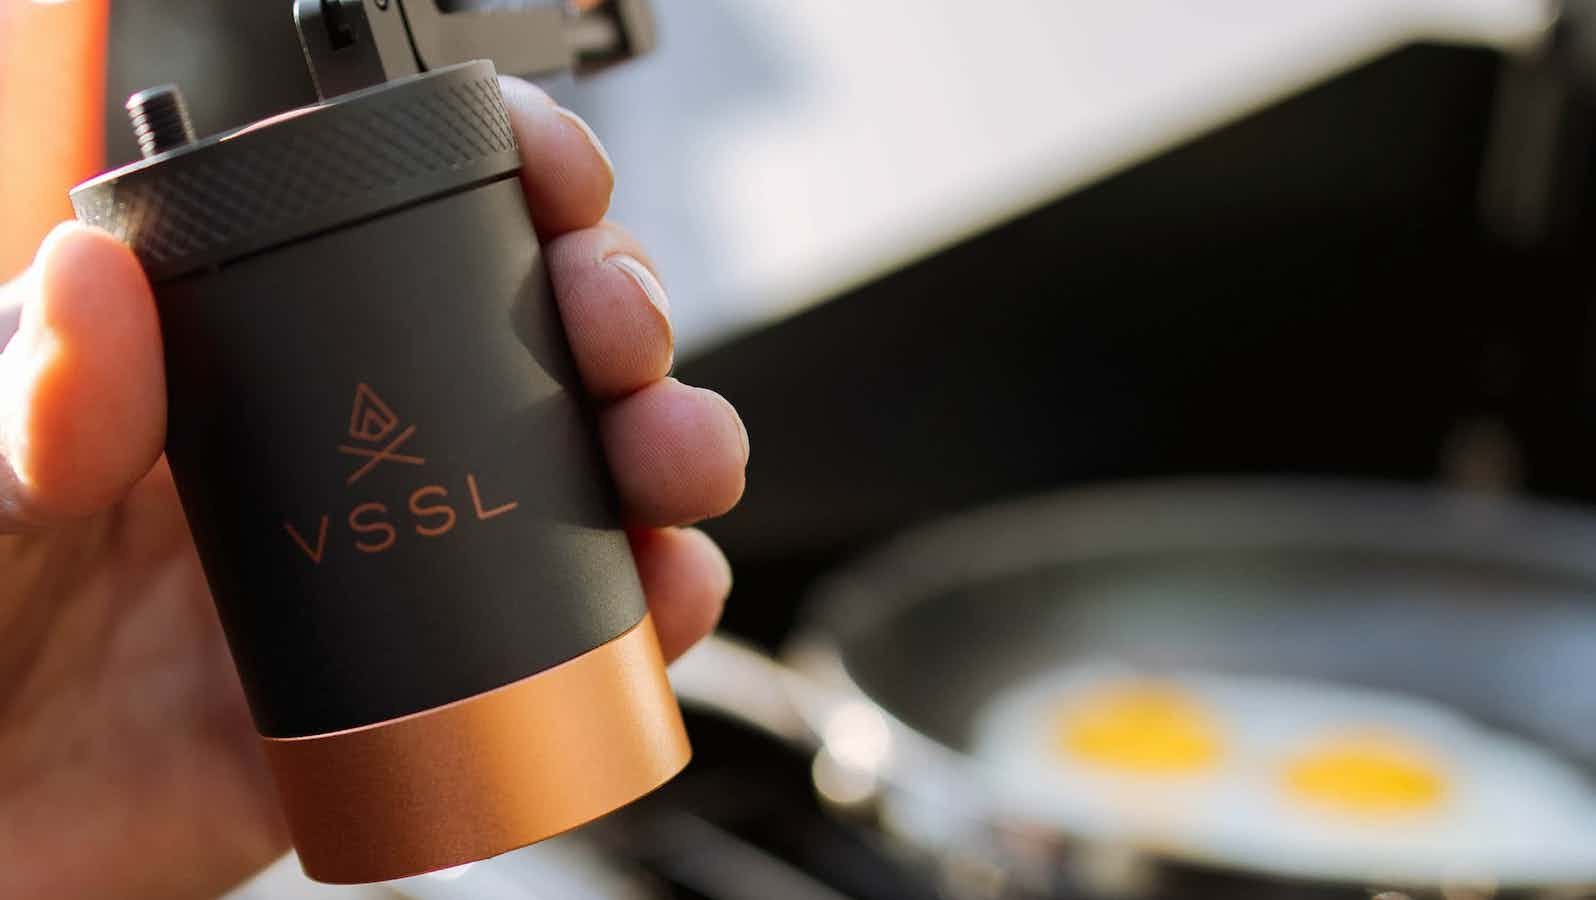 VSSL Java Handheld Coffee Grinder lets you make coffee on the go with 30 grind settings